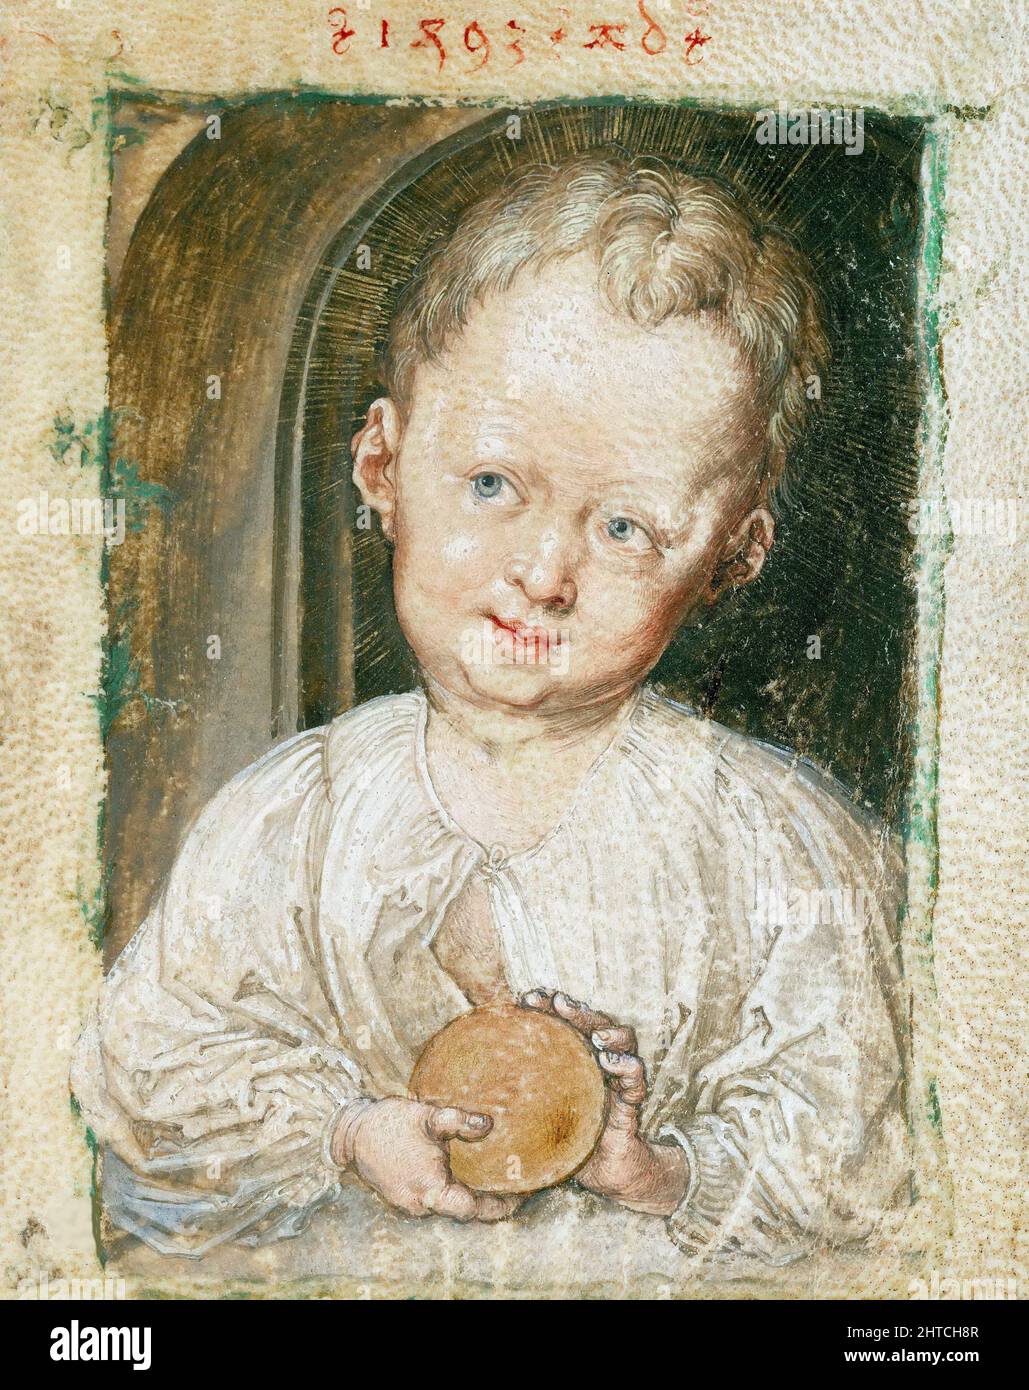 The Christ child holding the orb, 1493. Found in the Collection of the Albertina, Vienna. Stock Photo